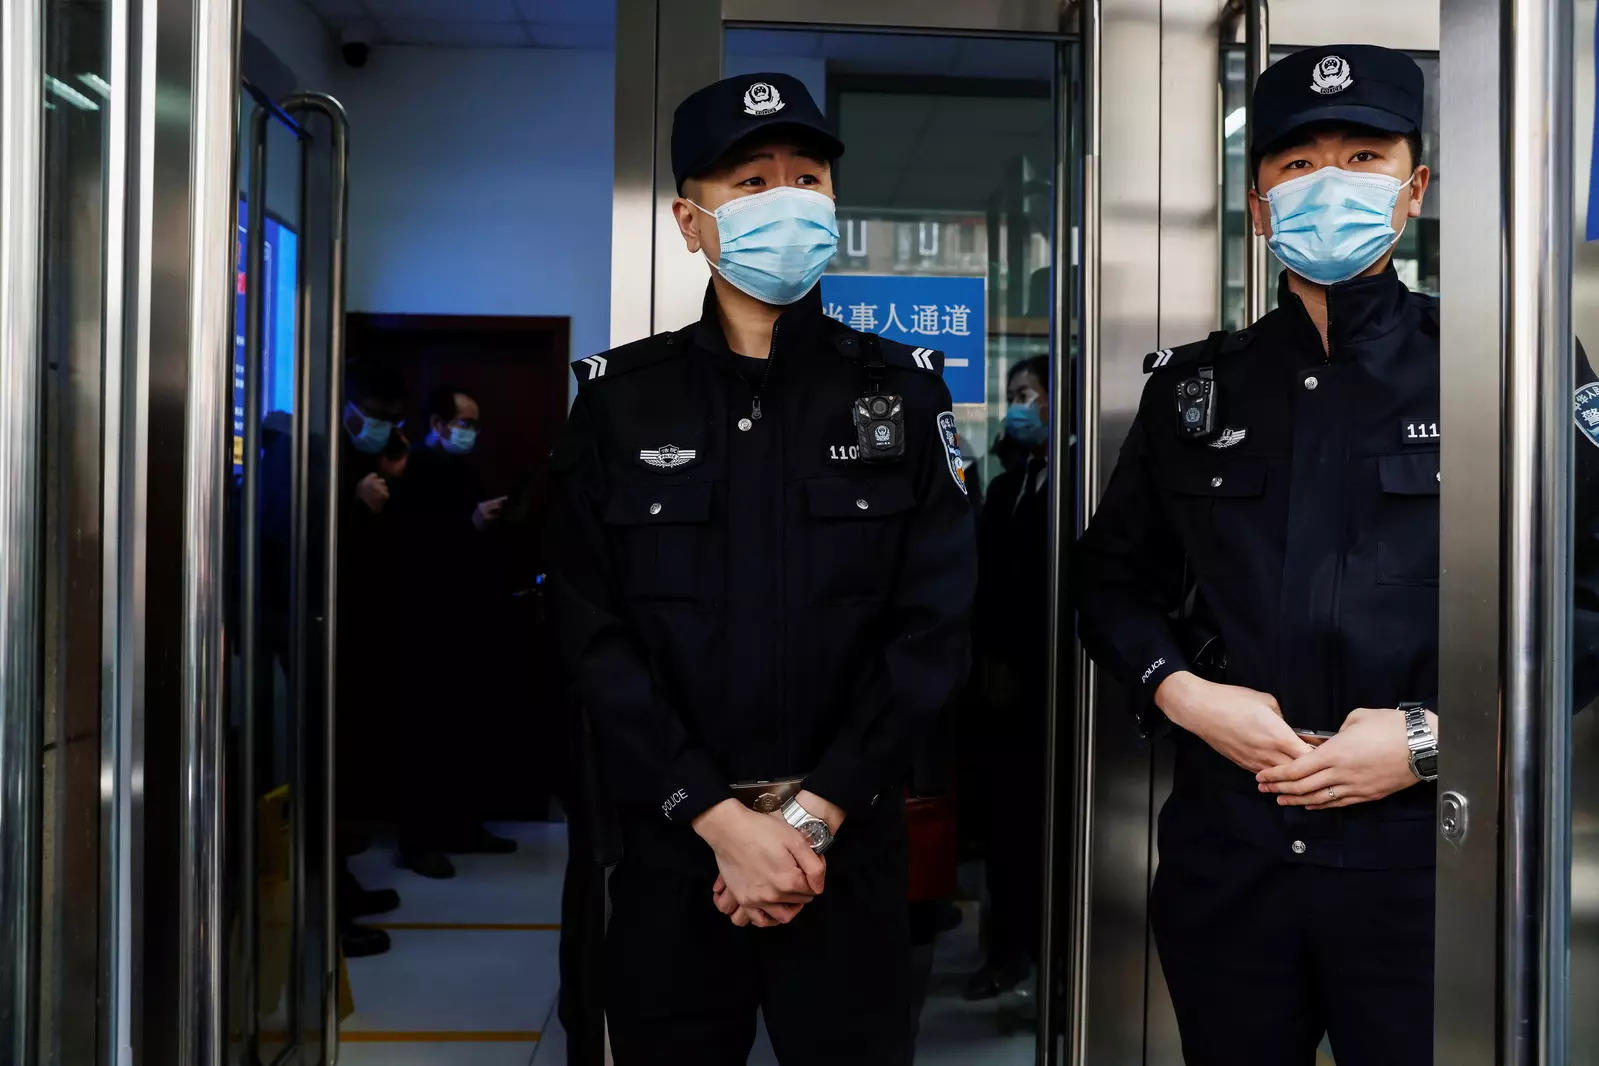 Police officers stand guard at an entrance of Beijing No. 2 Intermediate People's Court where Michael Kovrig, a Canadian detained by China in December 2018 on suspicion of espionage, is expected to stand trial, in Beijing 